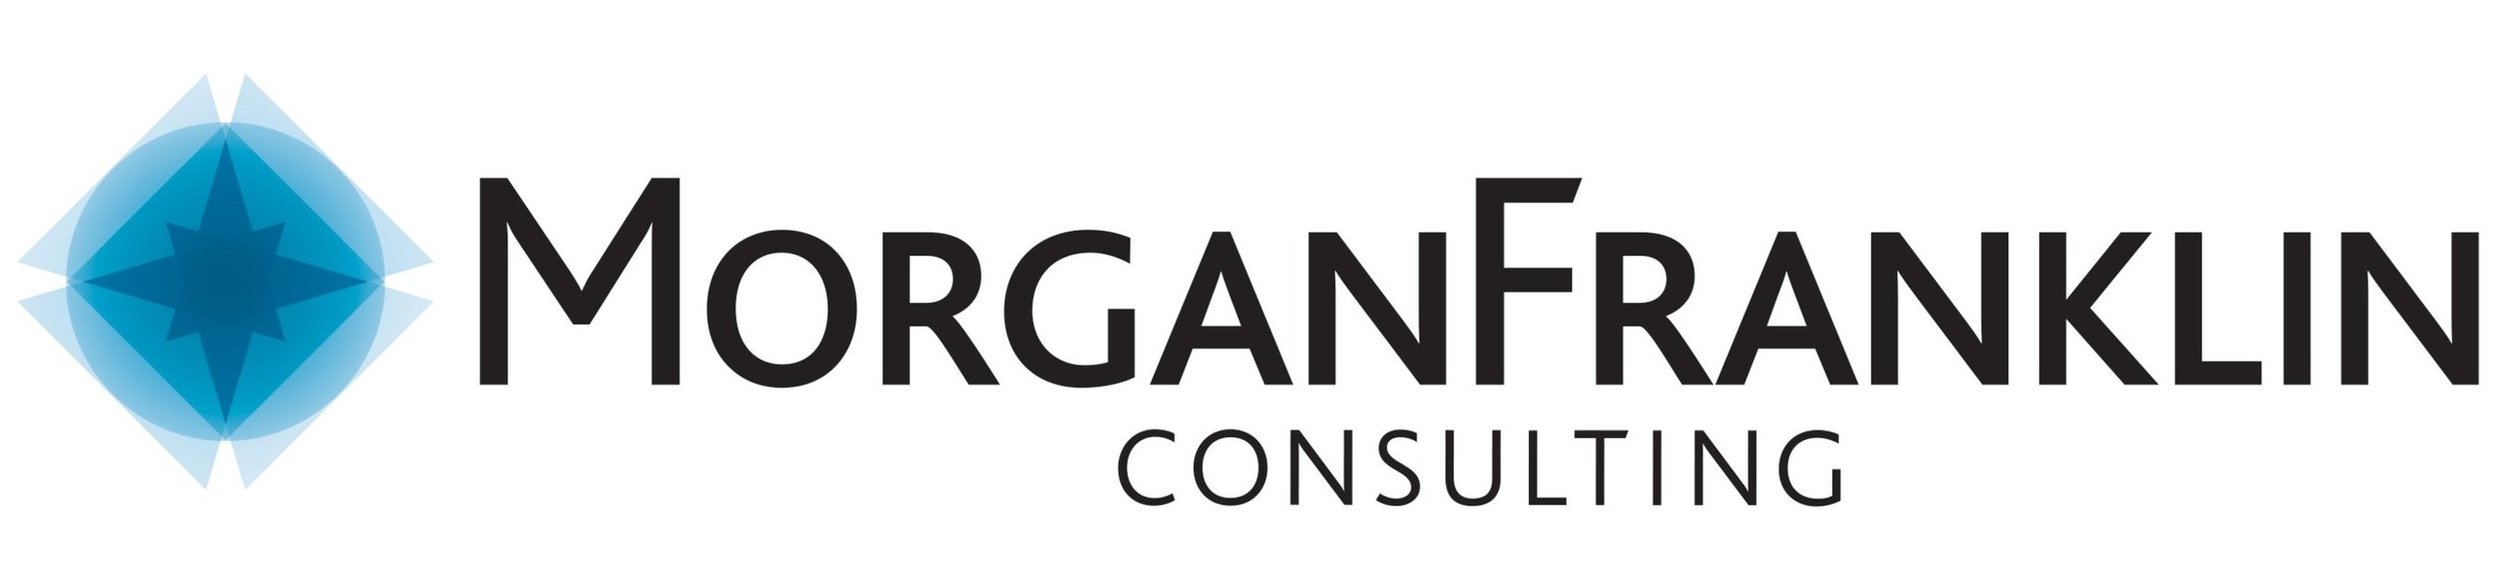 MorganFranklin_Consulting.jpg